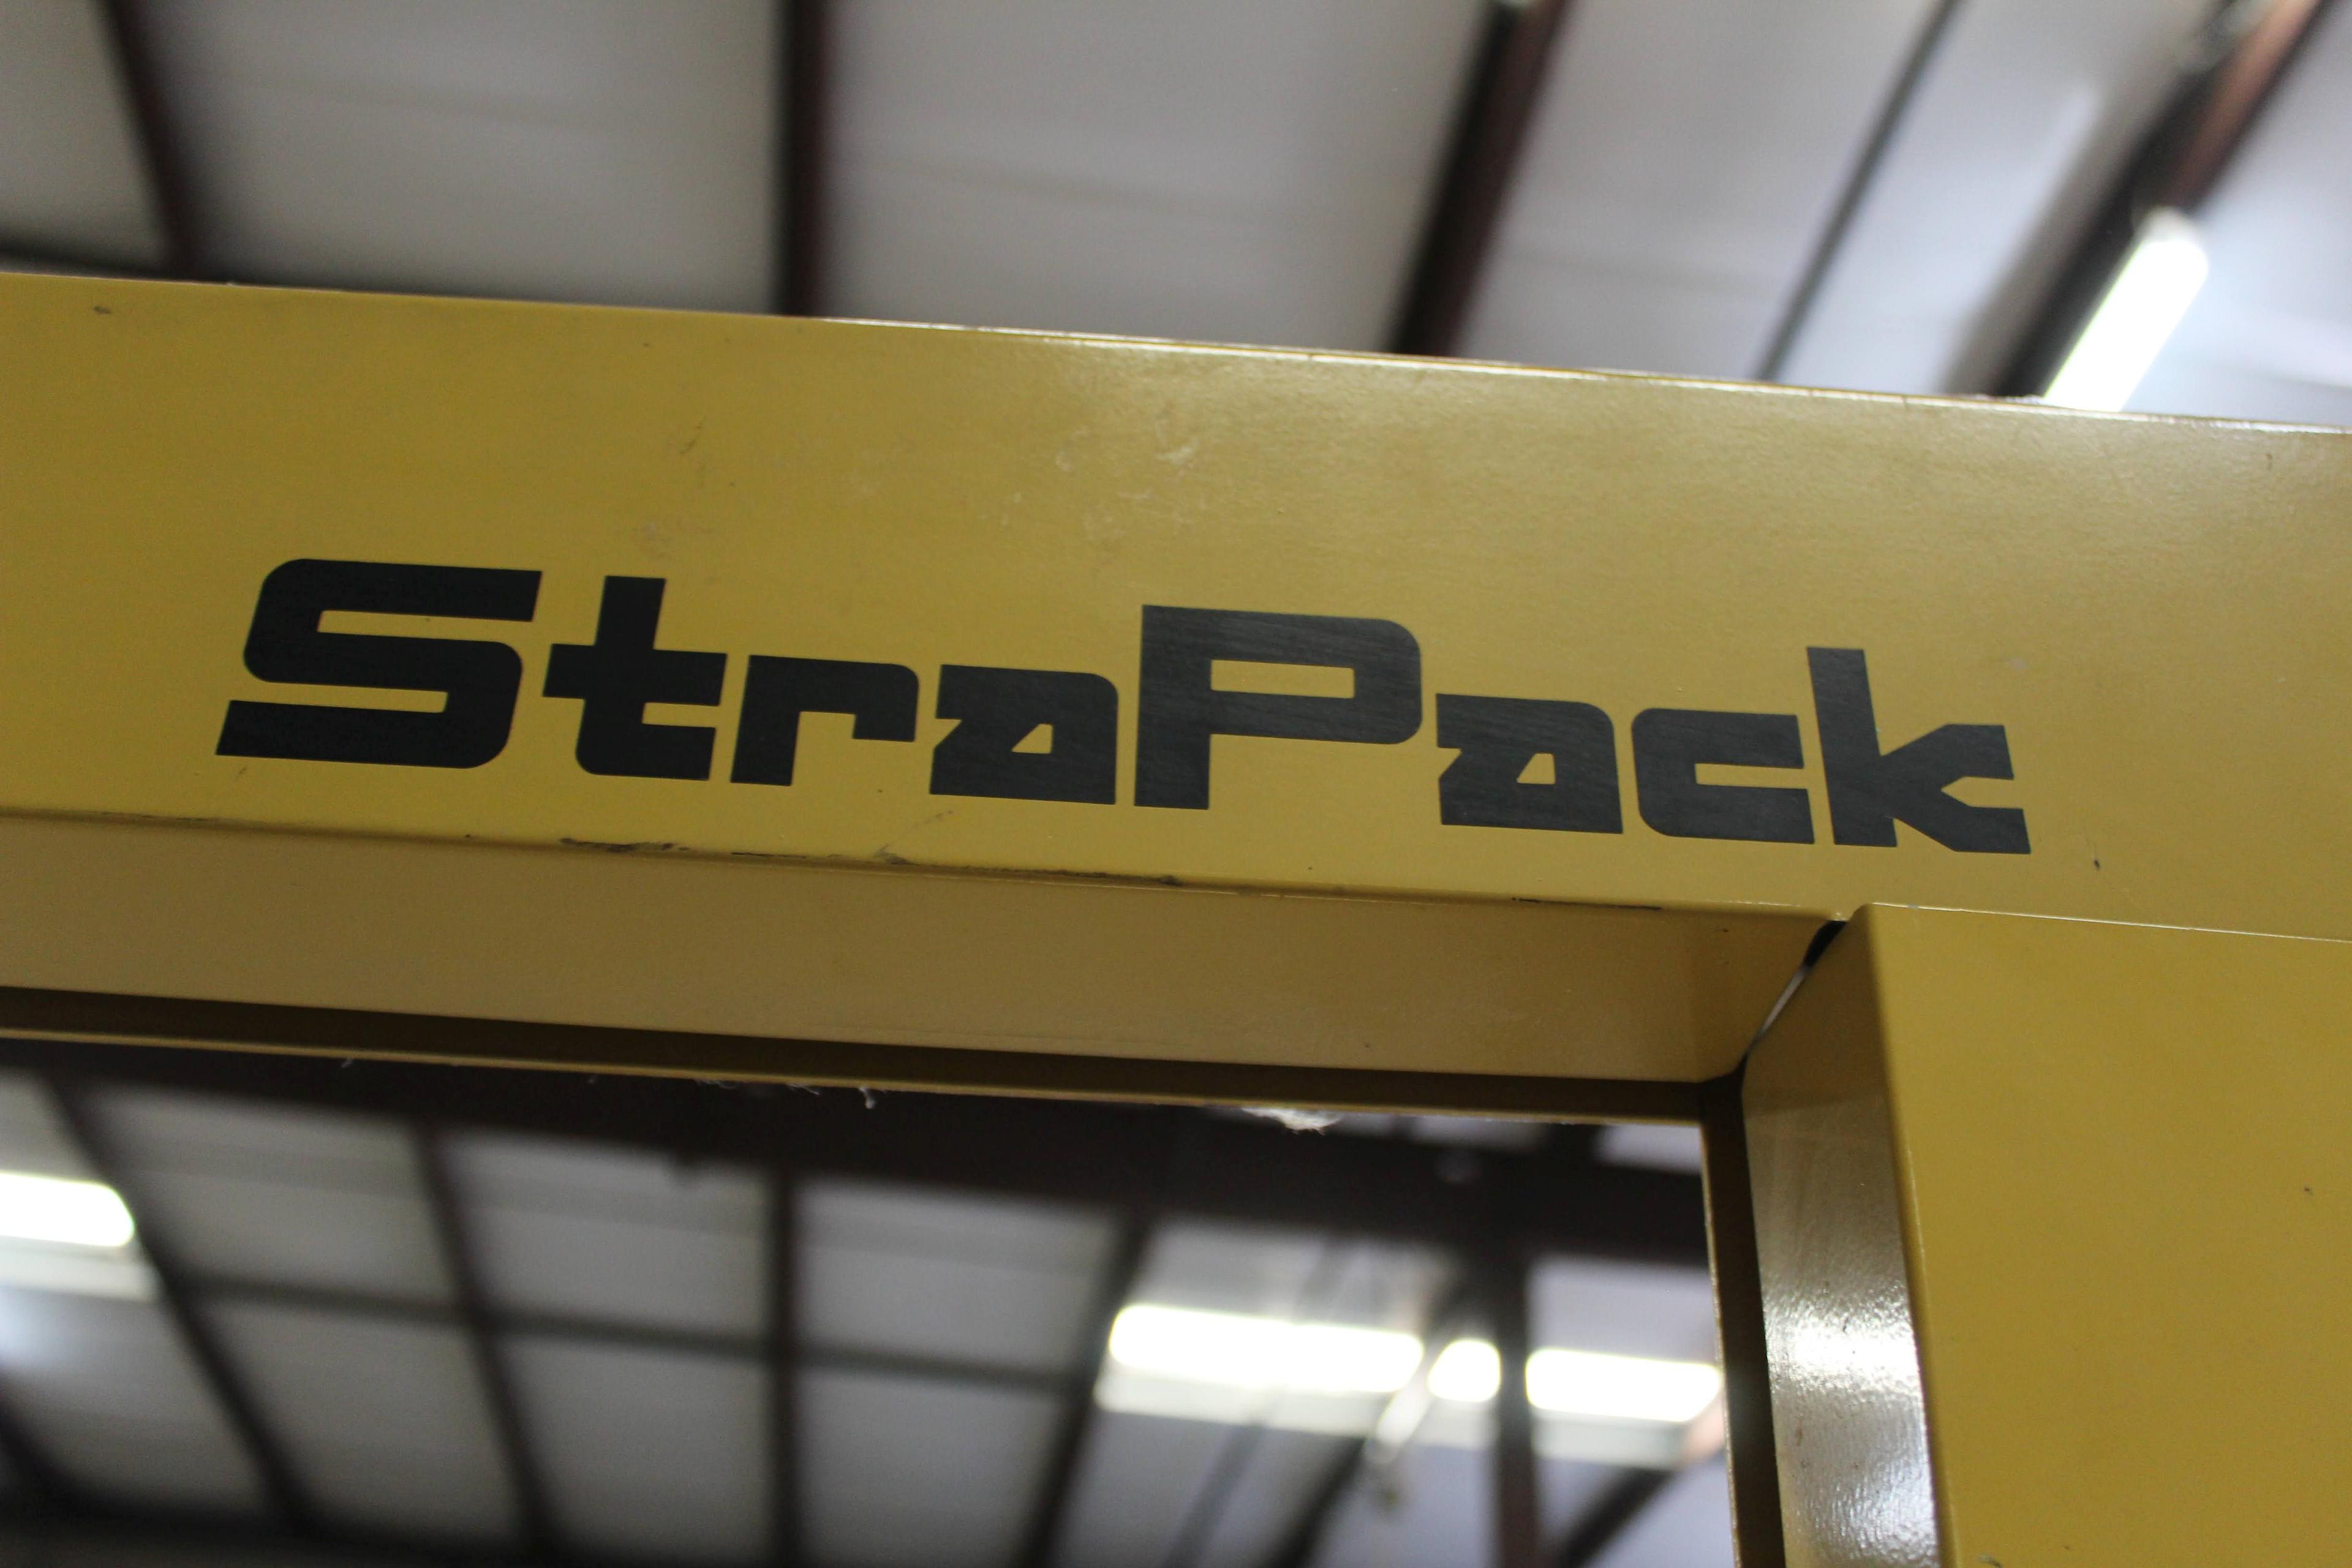 Strapack RQ-8 Automatic Strapping Machine